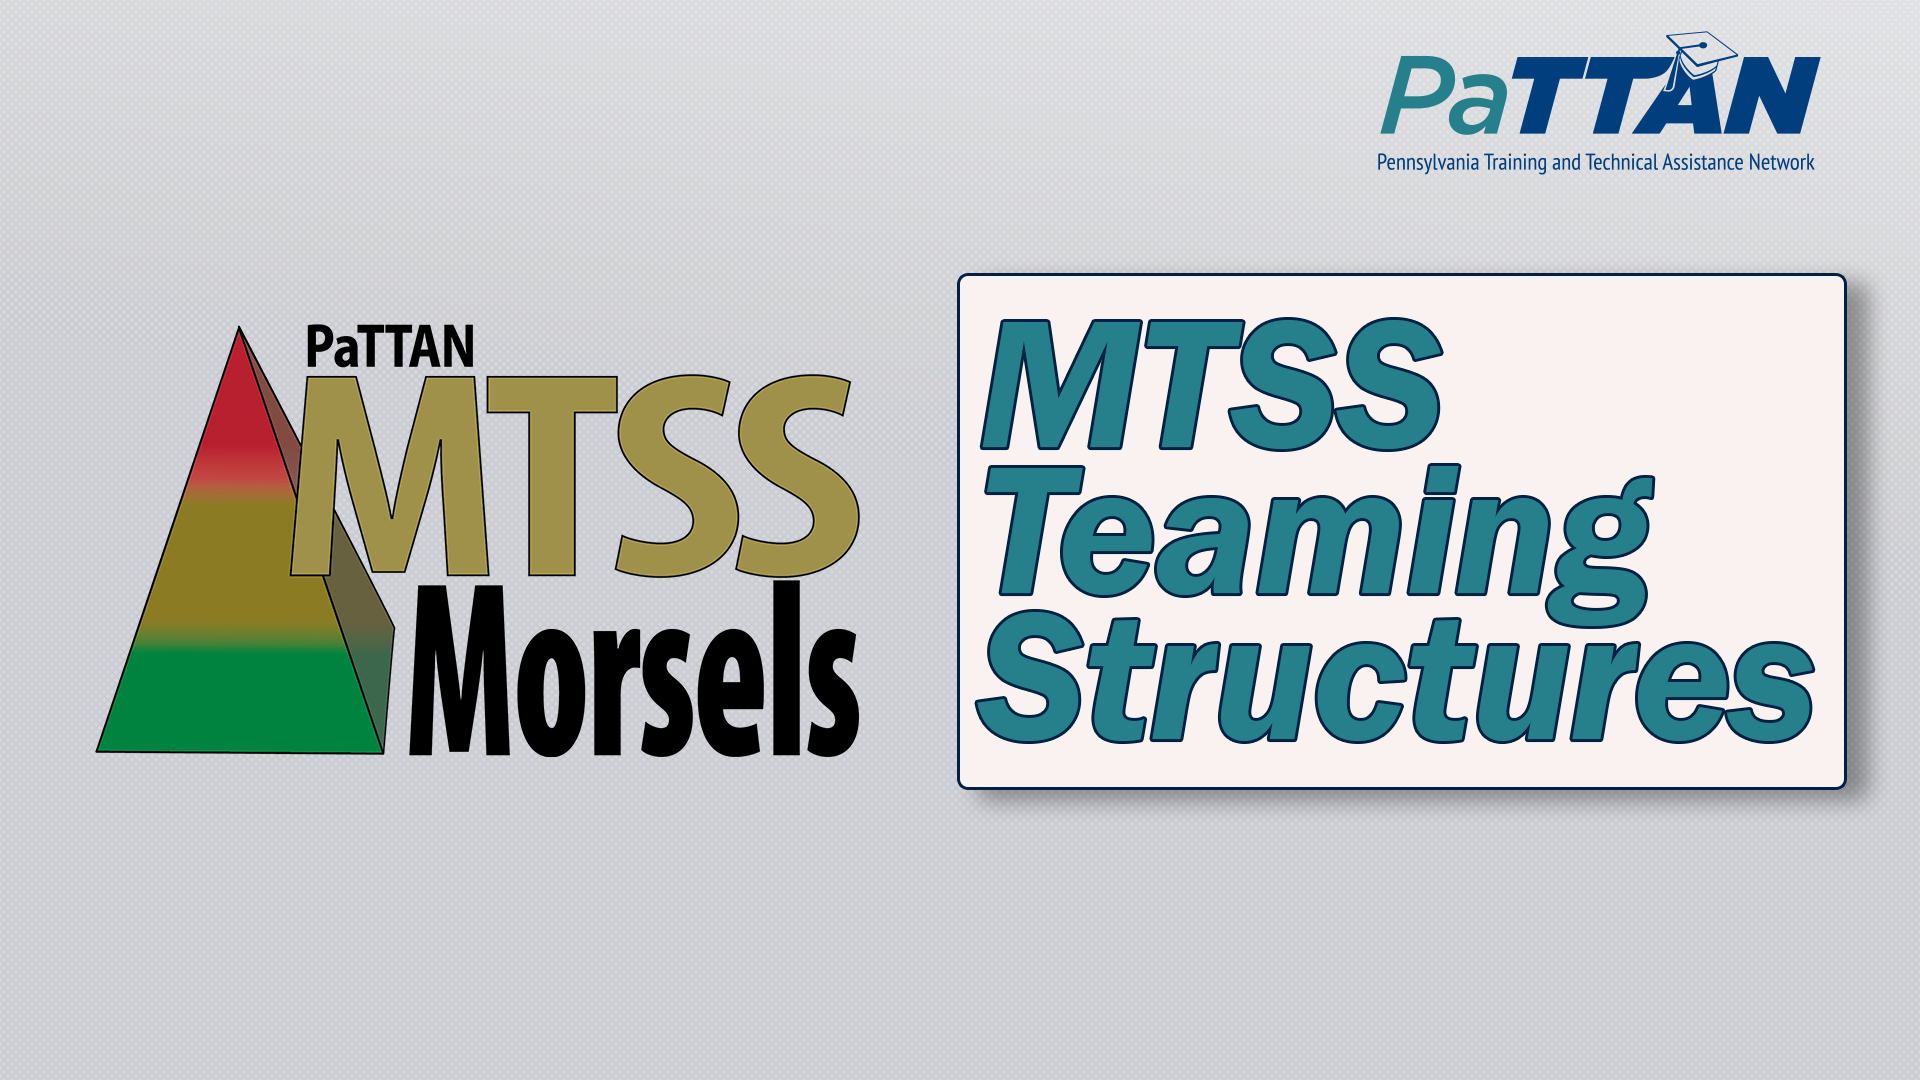 MTSS Teaming Structures | MTSS Morsels